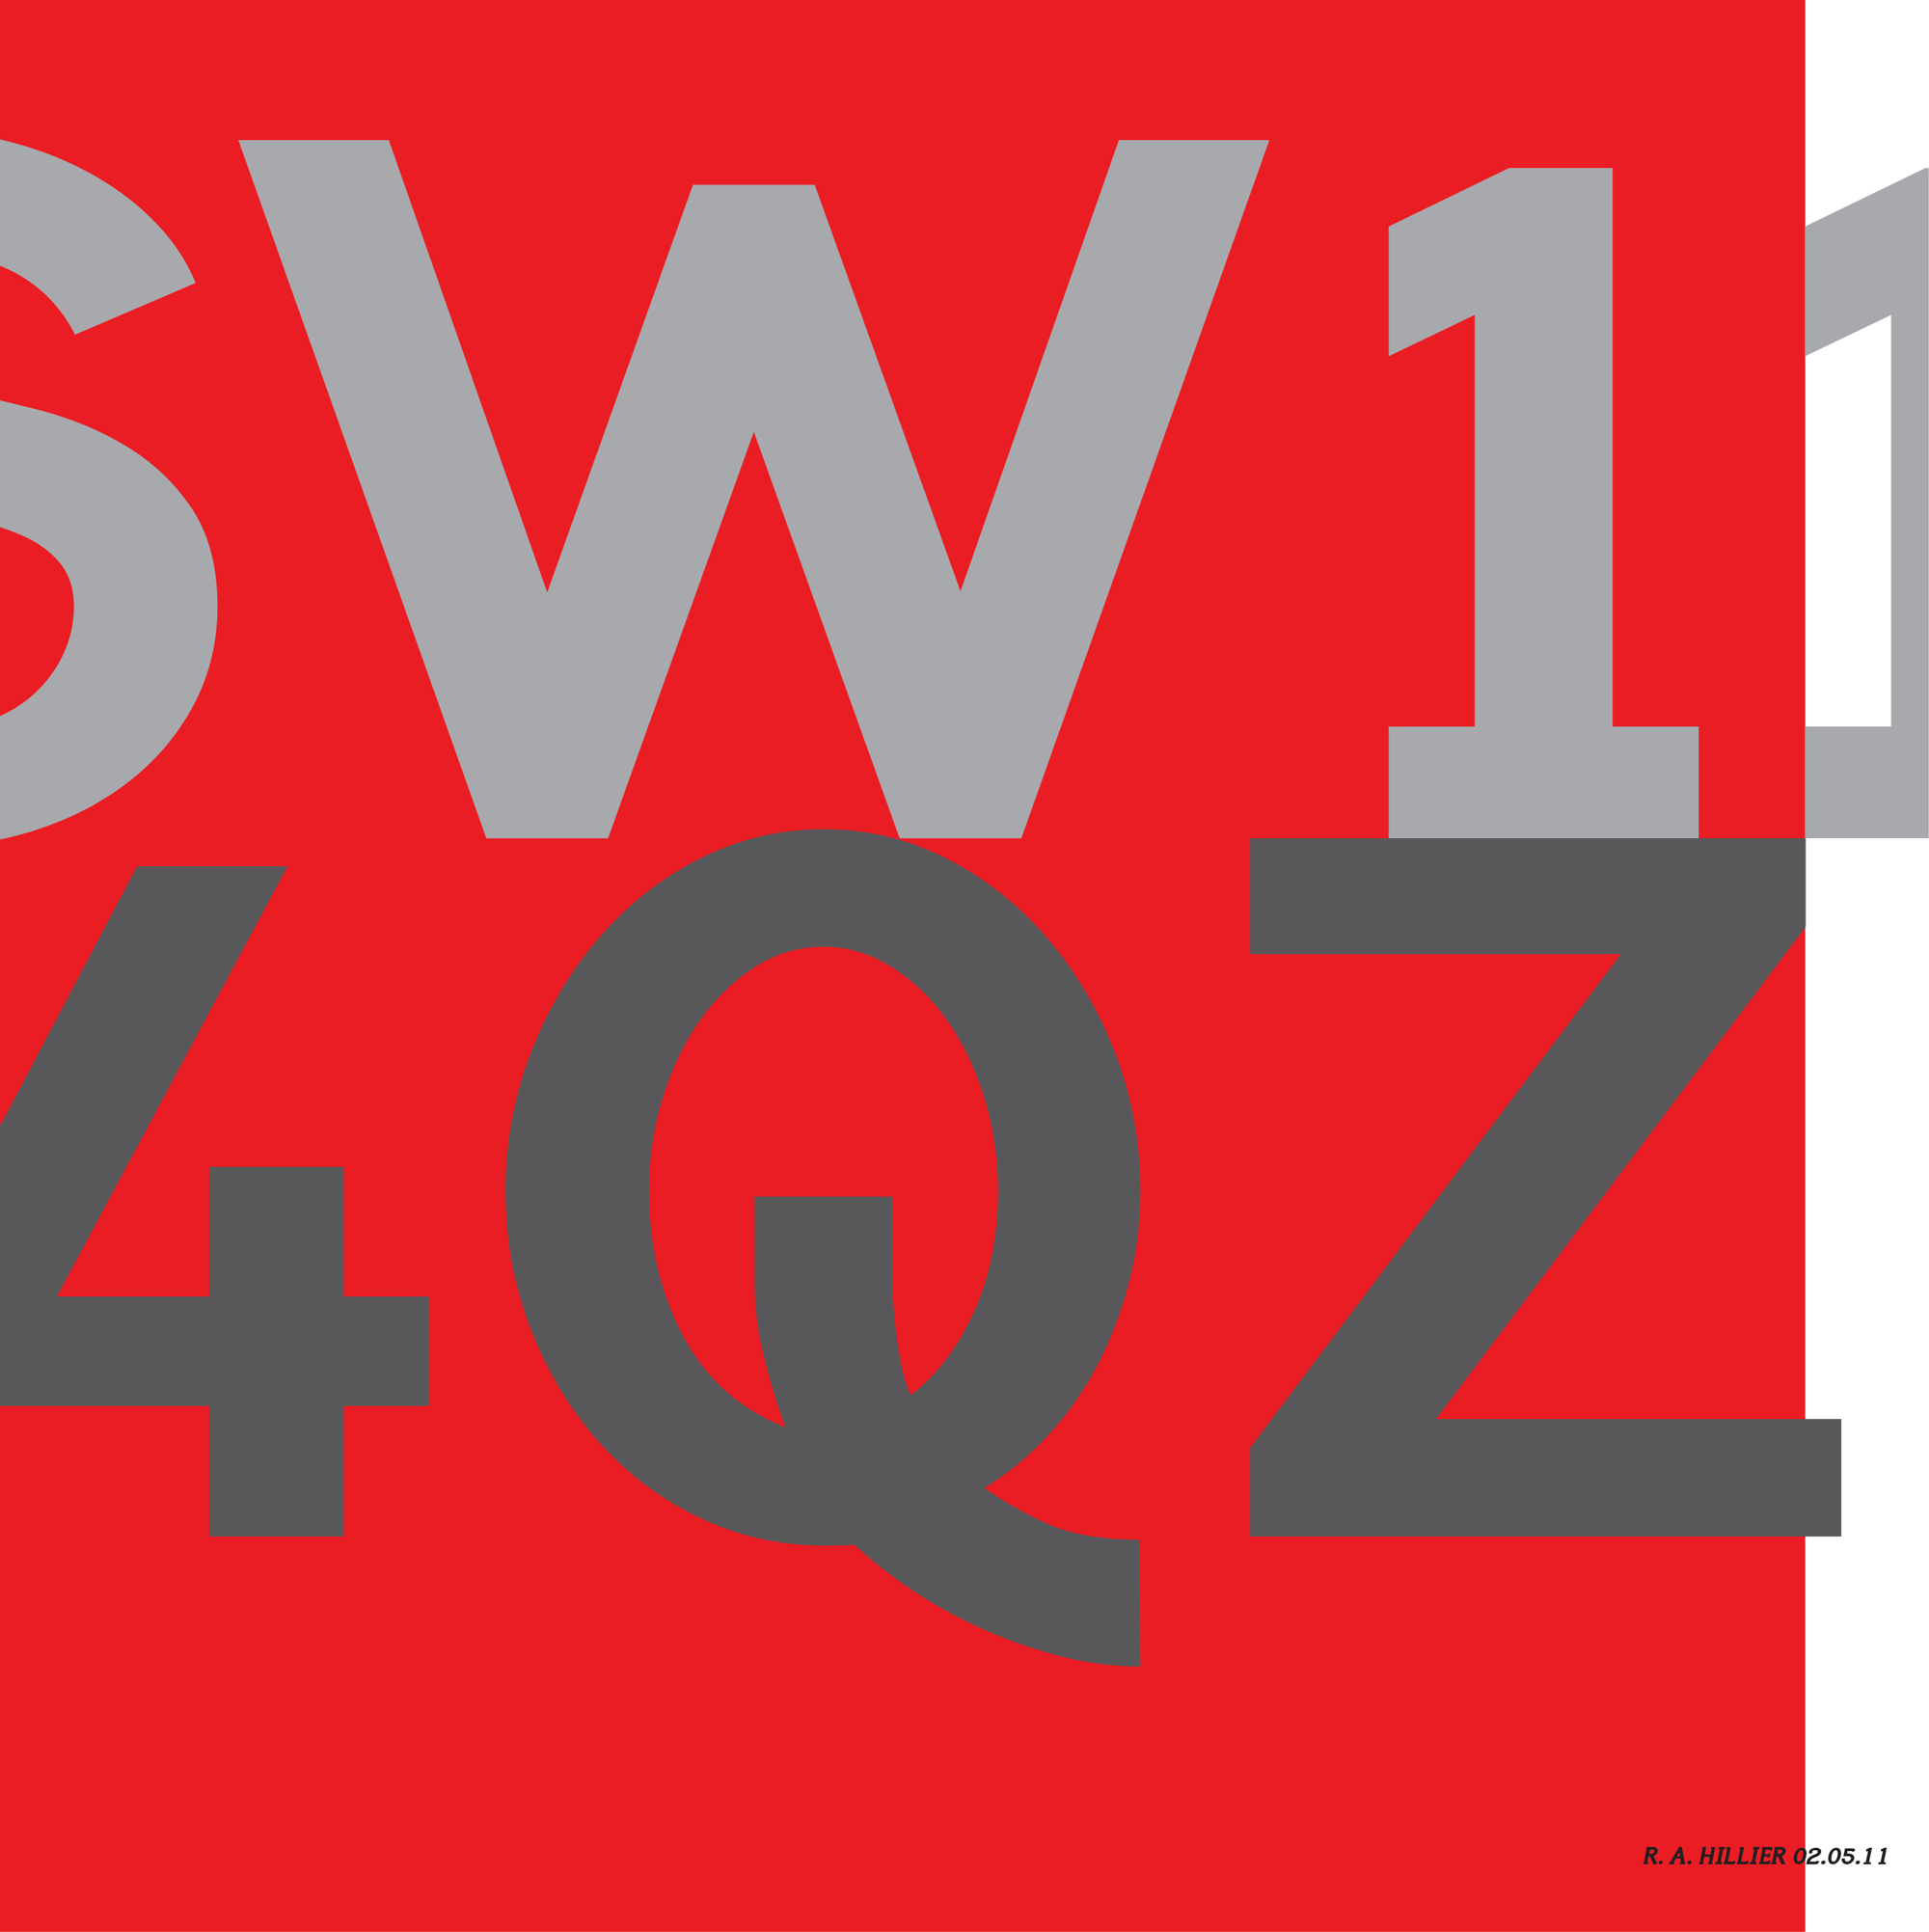 Large light and dark grey capital ‘SW11 4QZ’ letters, on a red background